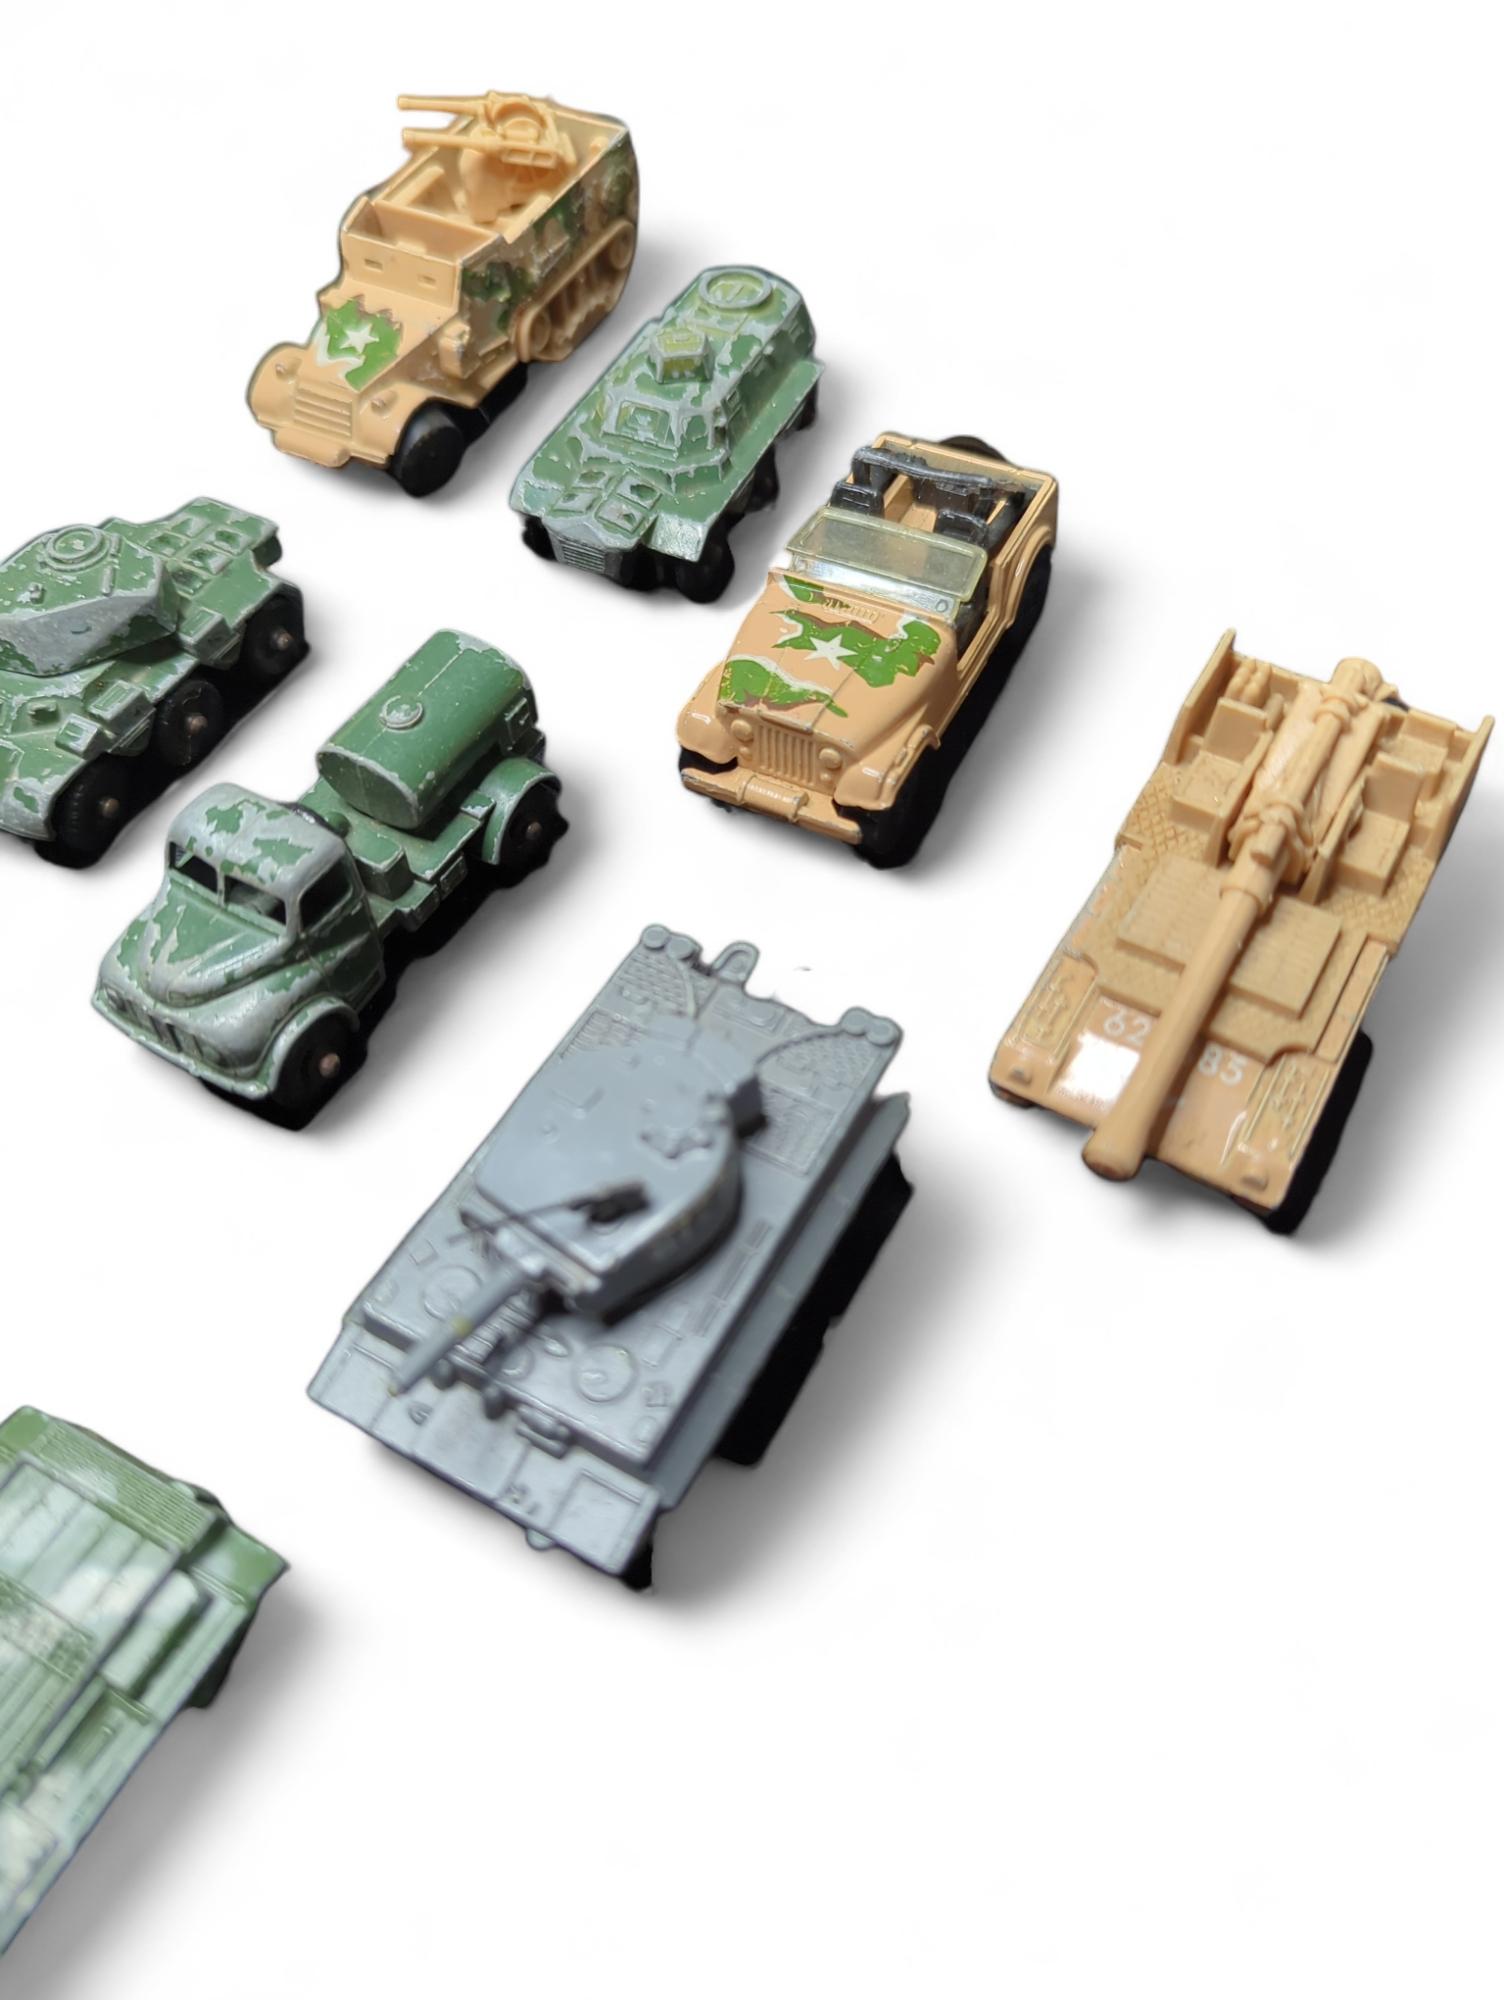 1960's-1980's Hot Wheels, Matchbox Army tanks and vehicles